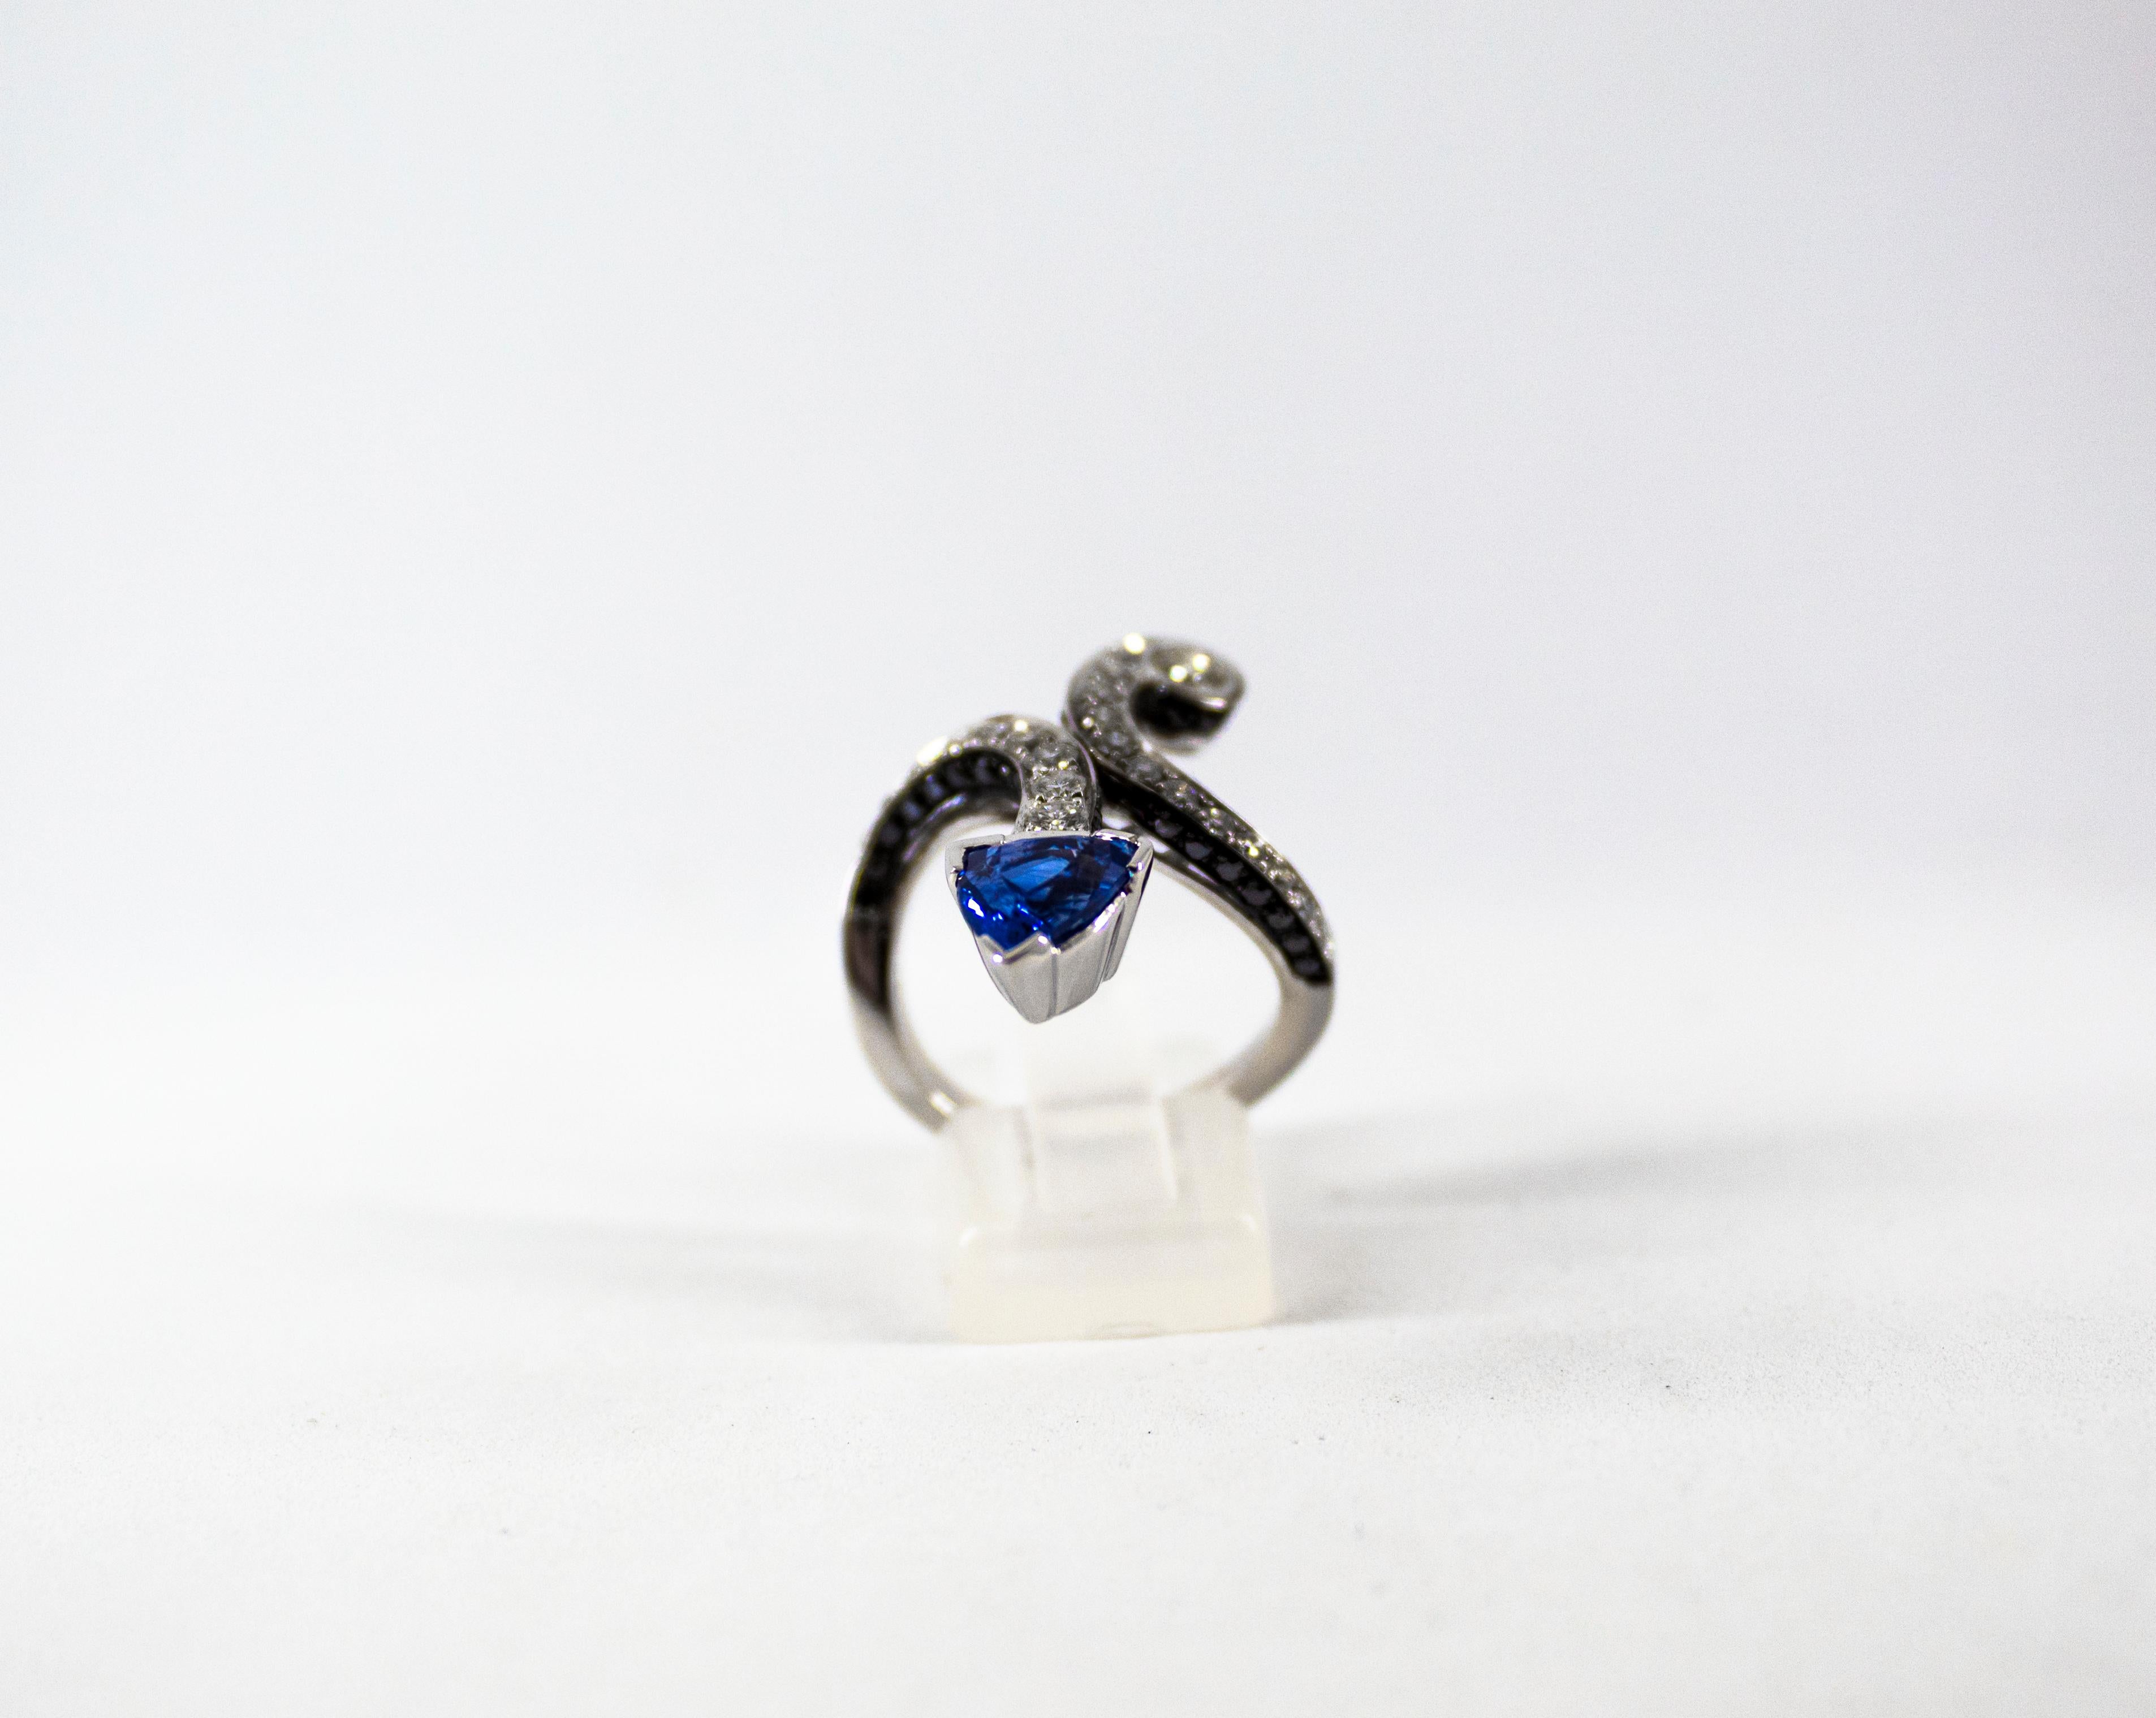 This Ring is made of 18K White Gold.
This Ring has 0.80 Carats of White Diamonds.
This Ring has 0.56 Carats of Black Diamonds.
This Ring has a 1.97 Carats Natural Blue Sapphire.
Size ITA: 16 USA: 7 1/2
We're a workshop so every piece is handmade,